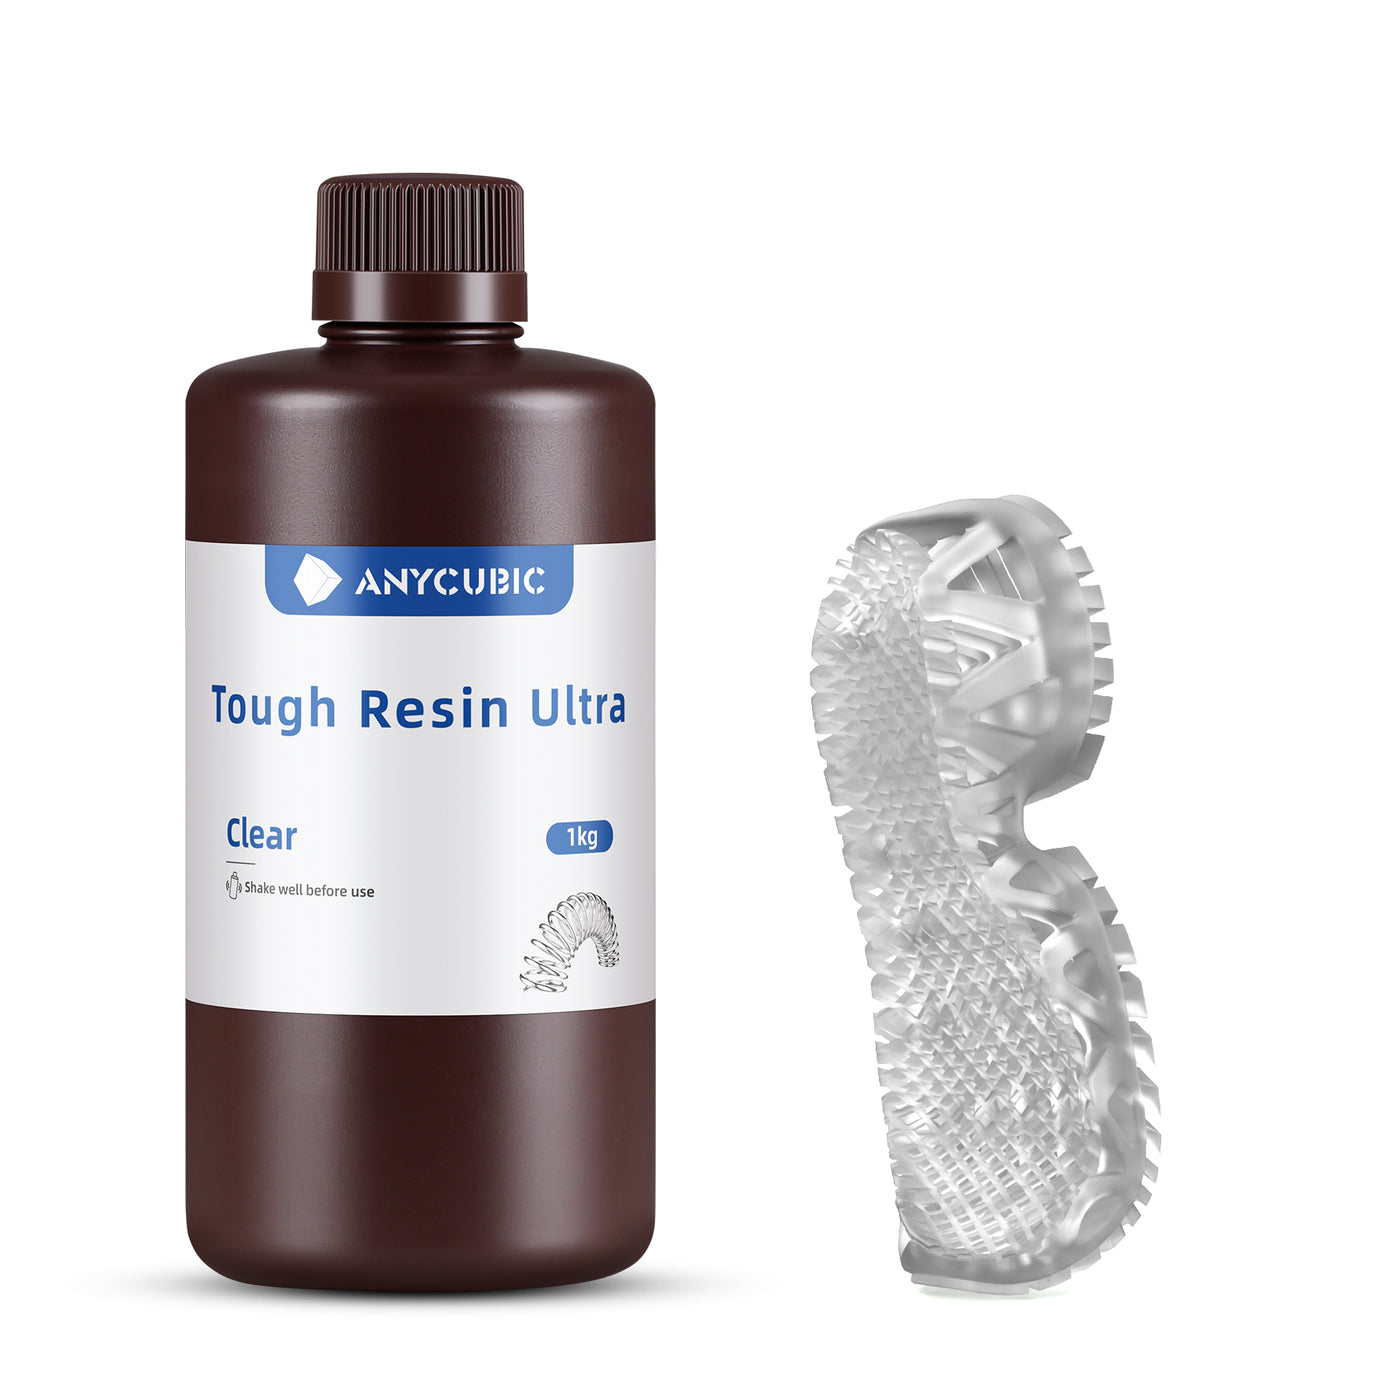 Tough Resin Ultra - Get 3 for the Price of 2